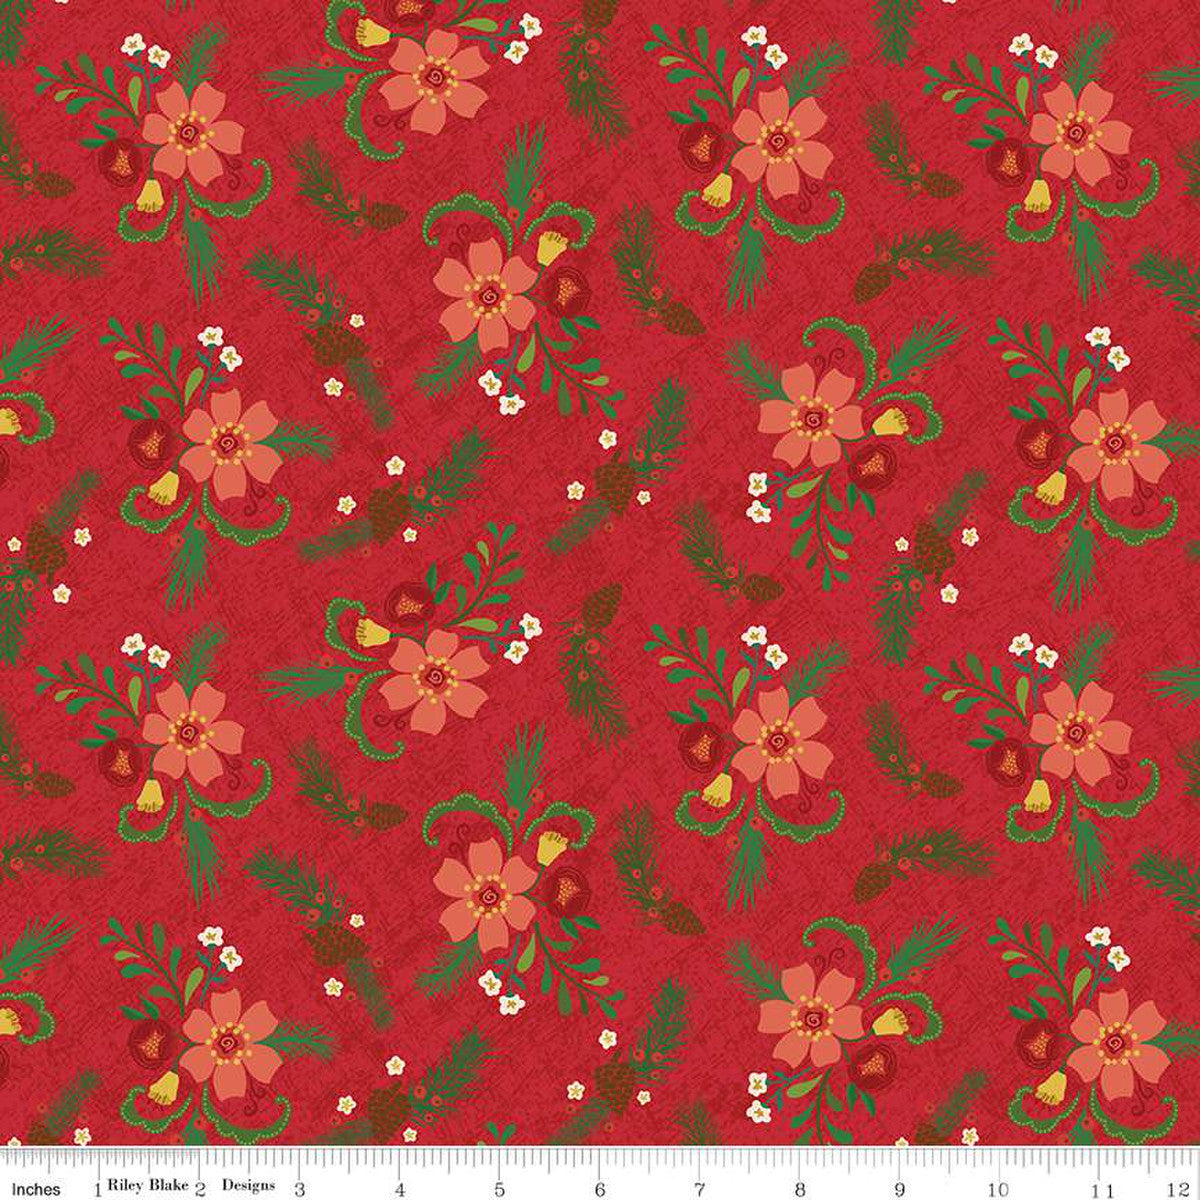 In From The Cold Main Red Yardage by Heather Peterson | Riley Blake Designs #C14860-RED